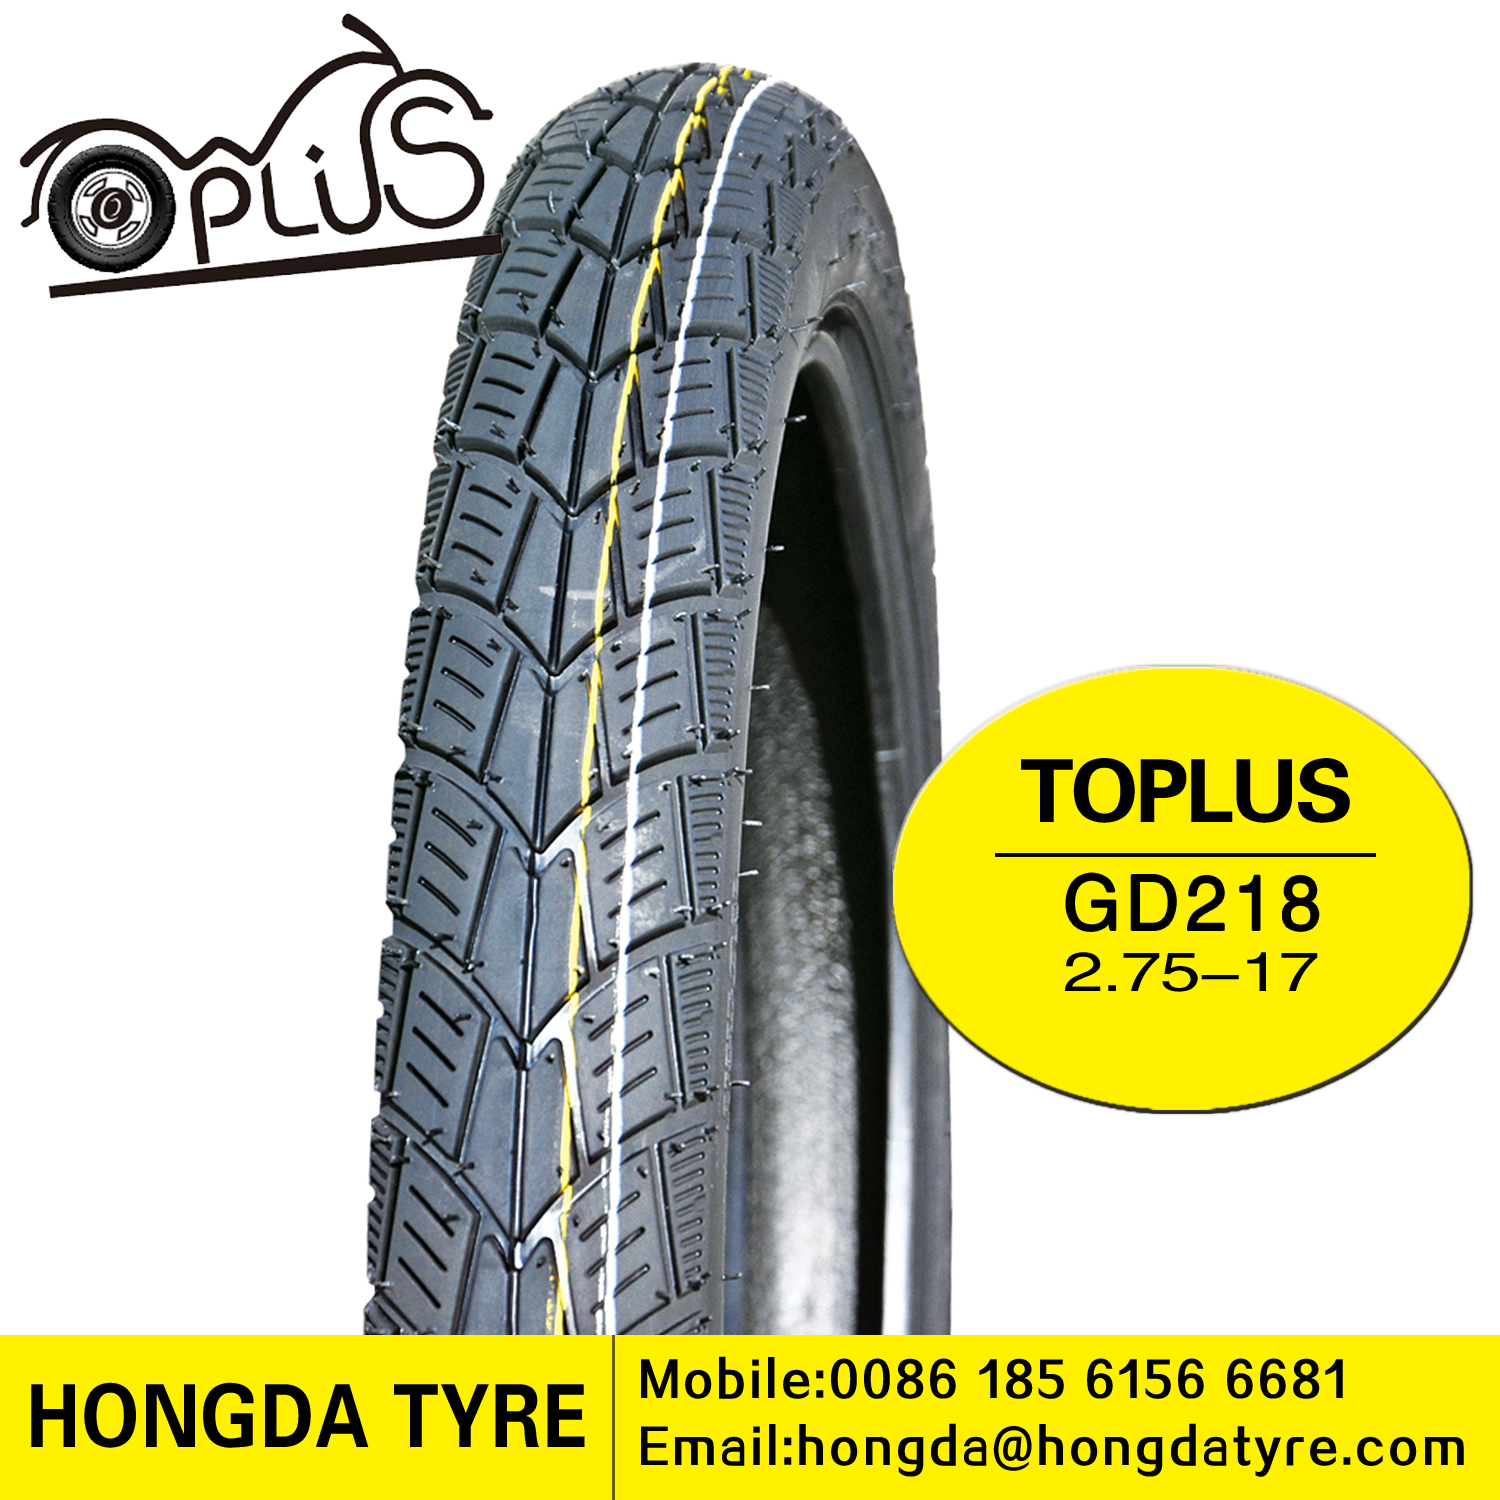 Motorcycle tyre GD218